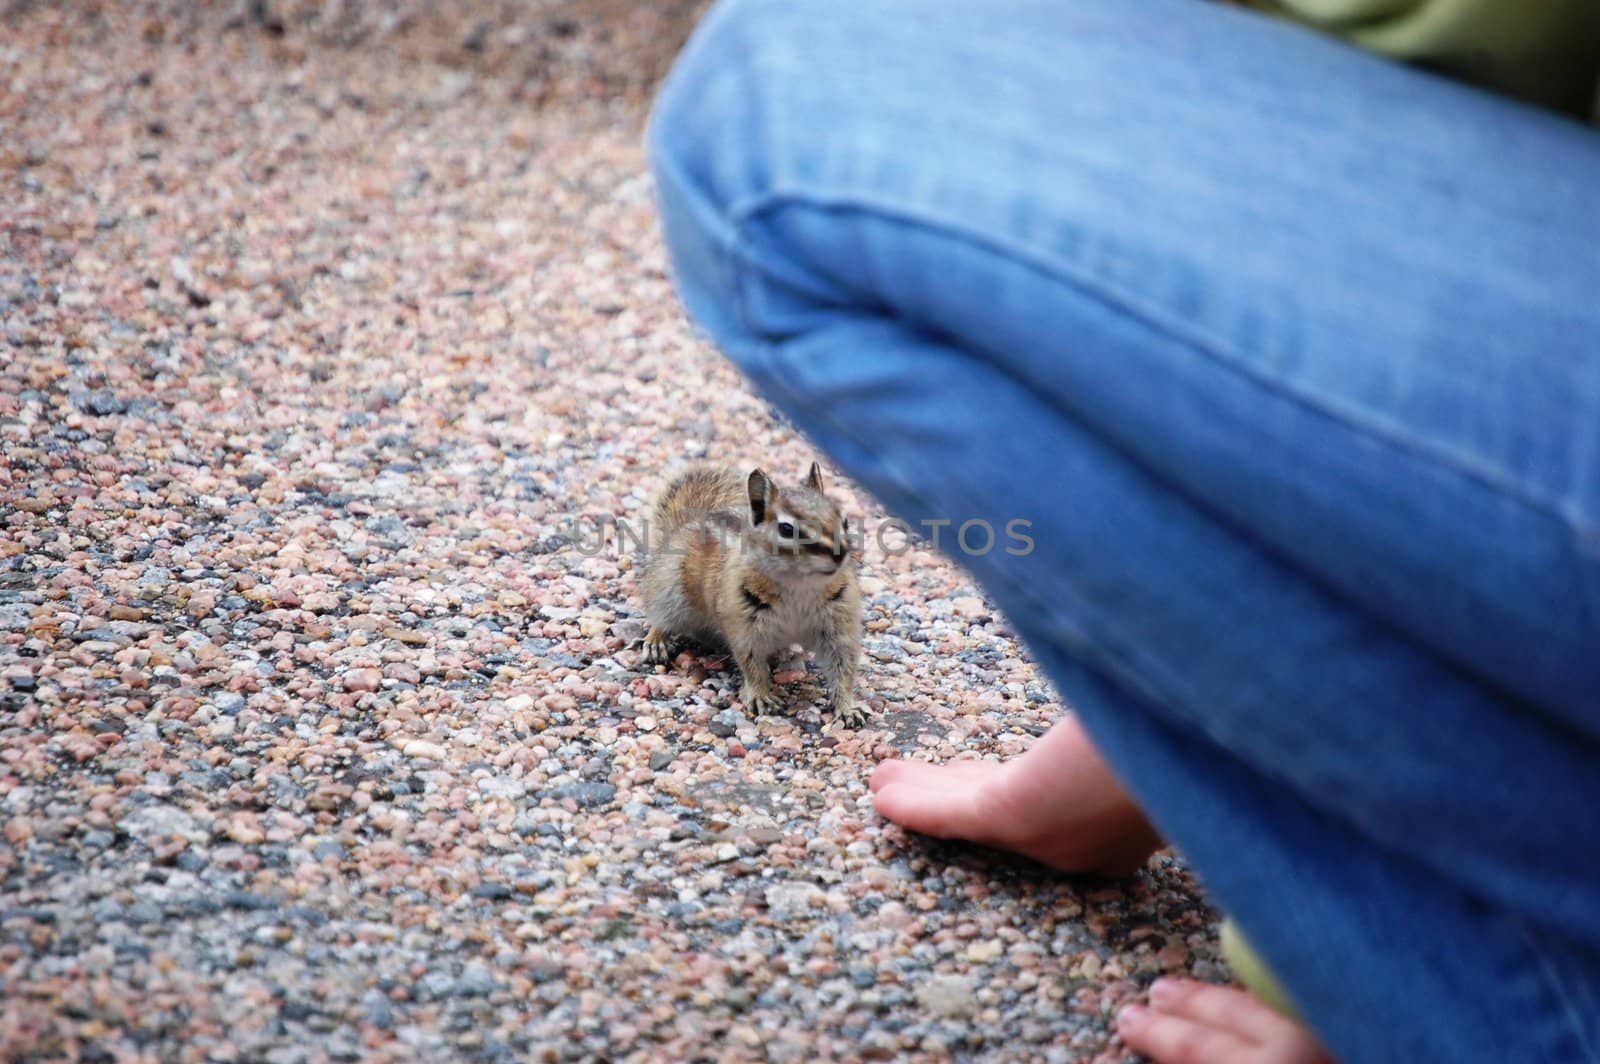 Chipmunk looks to person for food by RefocusPhoto